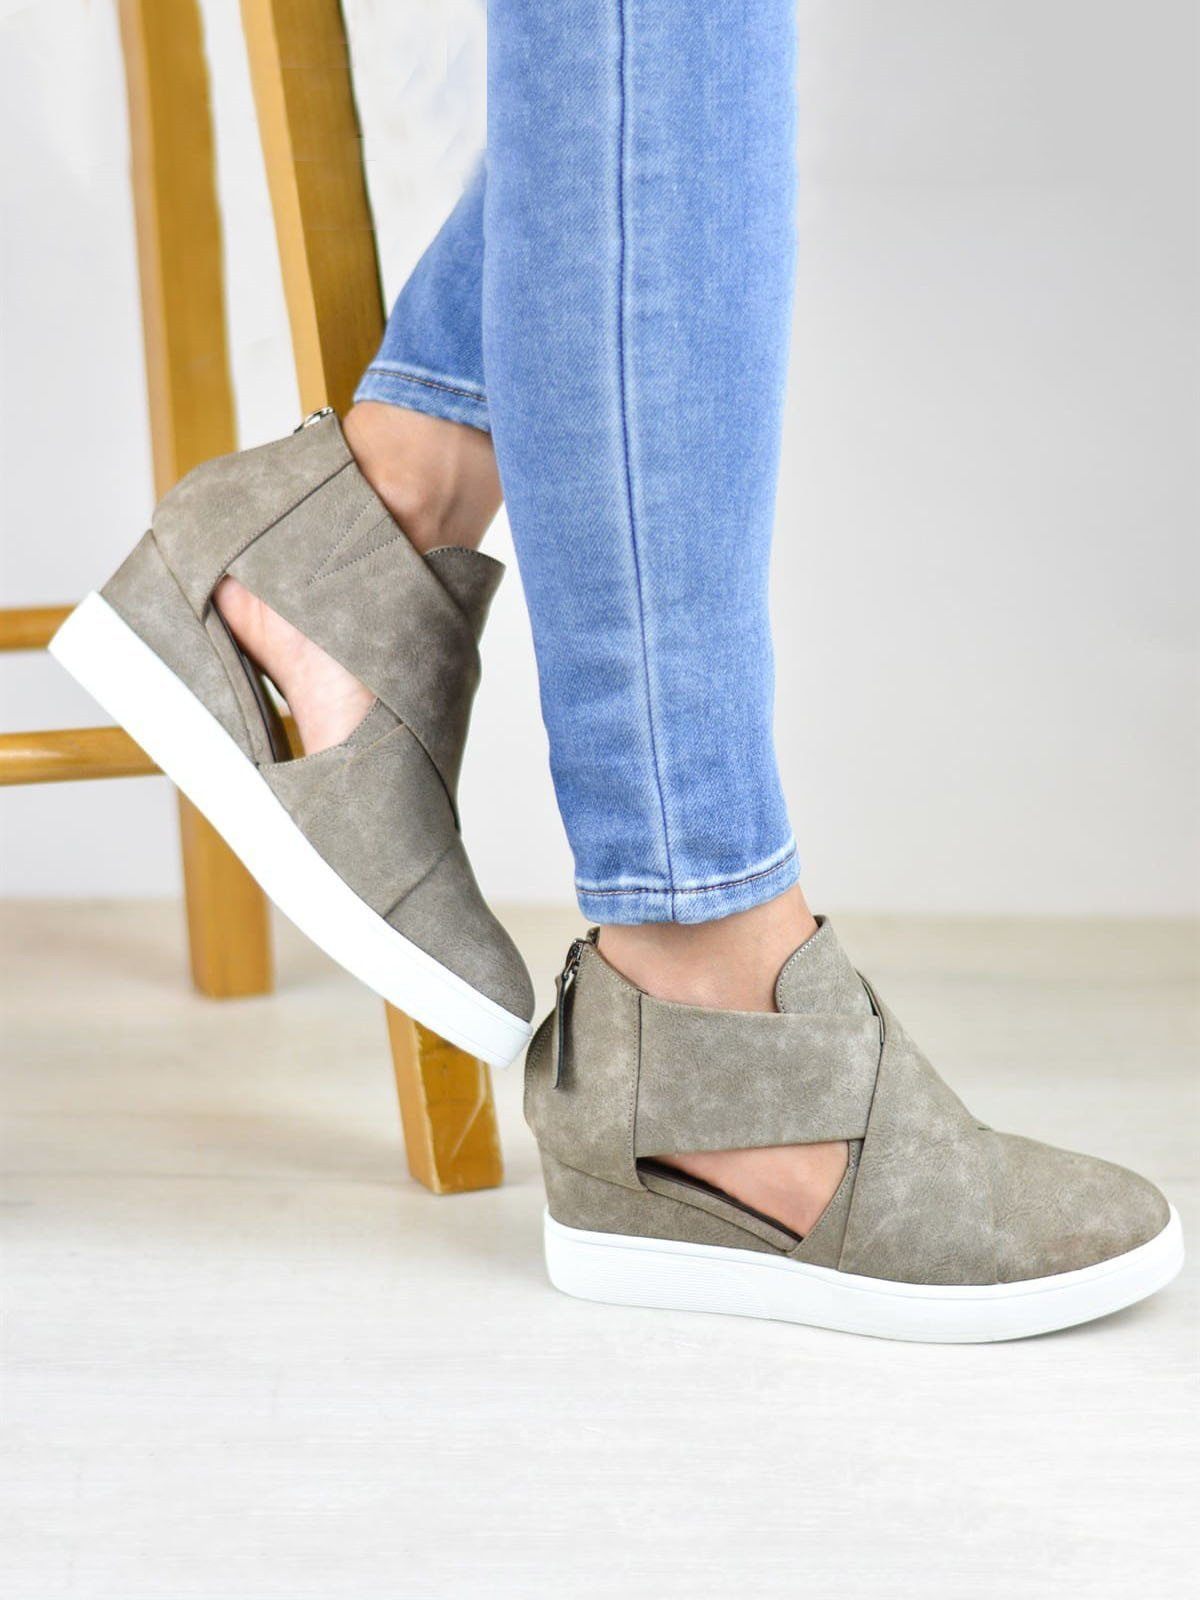 Women Spring Cut Out Ankle Boots Wedge Sneakers Plus Size Shoes